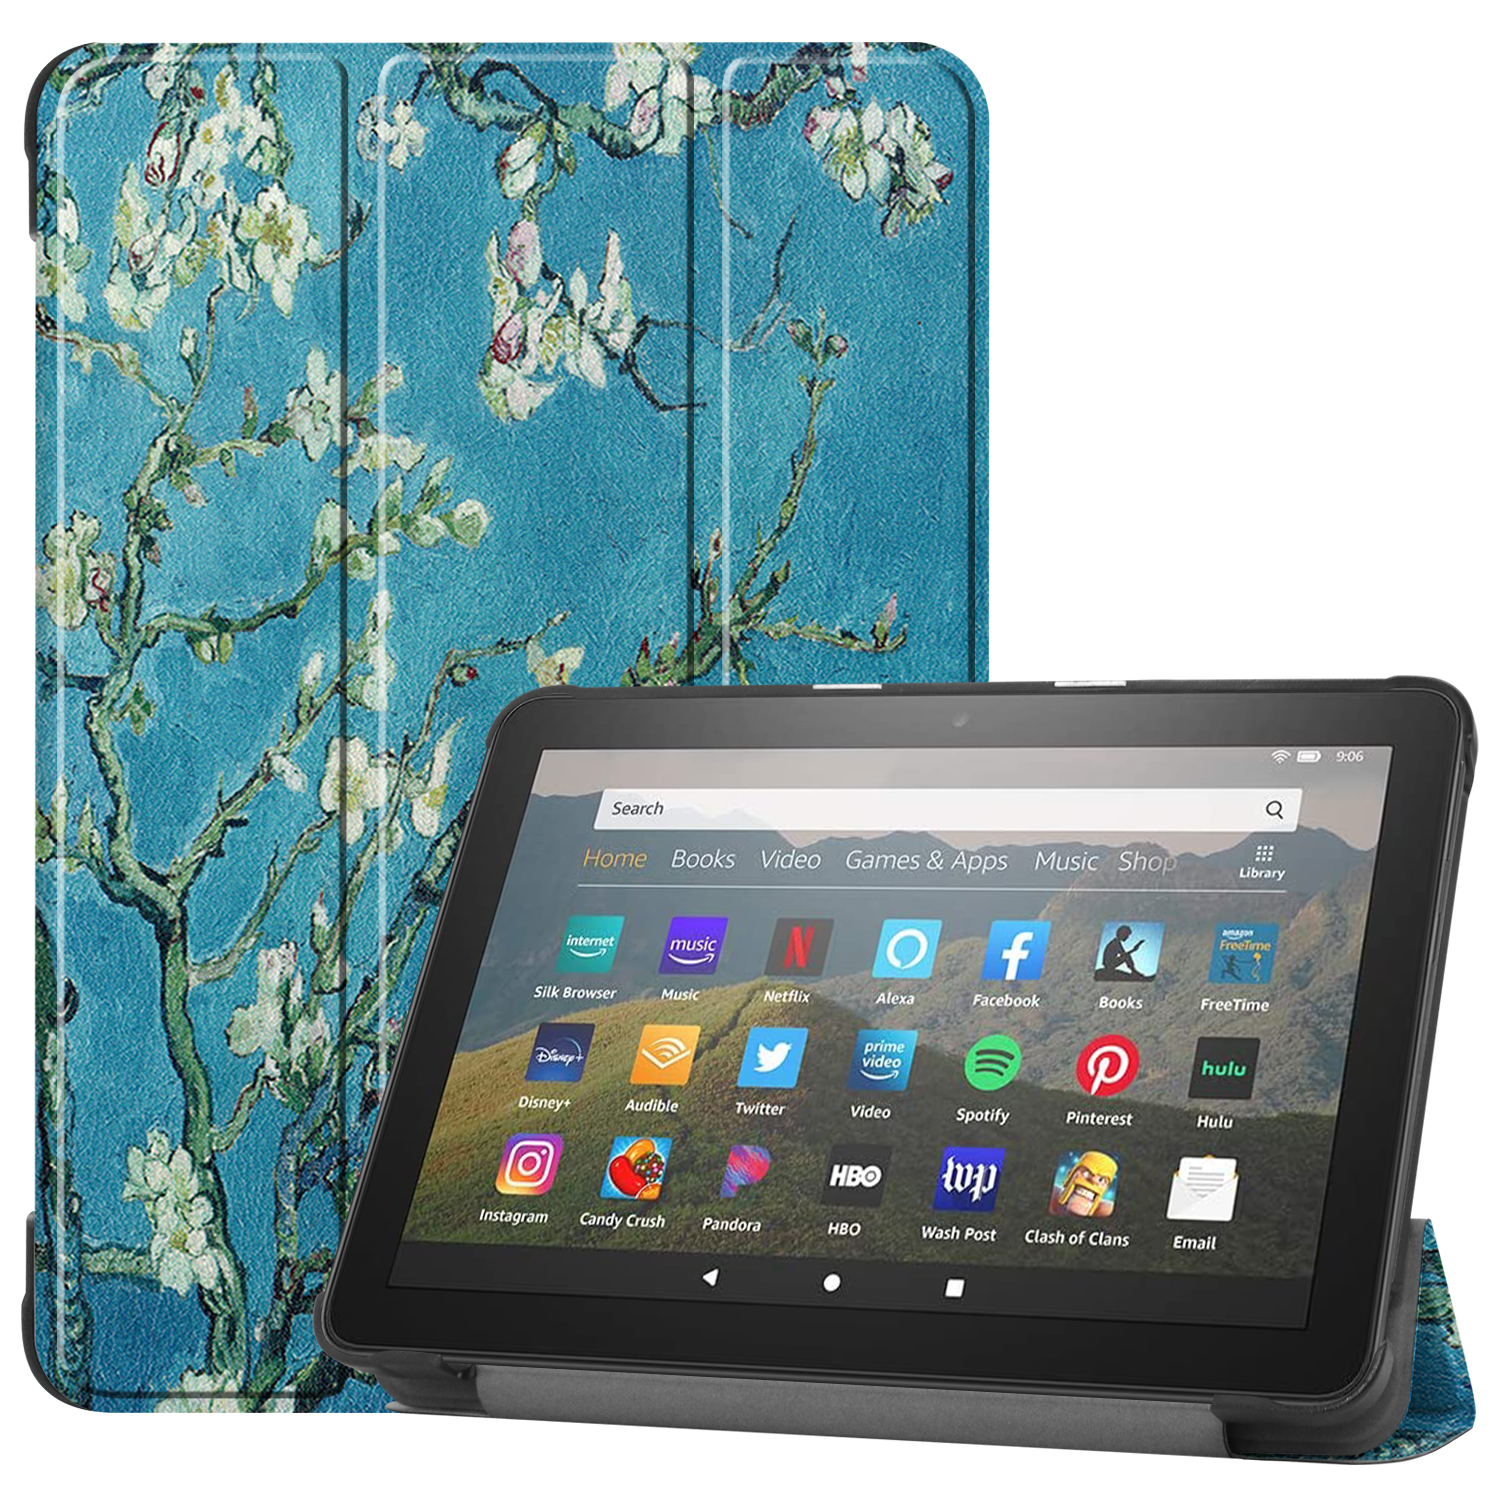 Allytech Amazon New Kindle Fire HD 8 Case (8-inch Display, 10th Generation, 2020 Released), Slim Trifold Stand Protective Auto Sleep Wake Case Cover for Amazon Kindle Fire HD 8 2020, Blossom - image 1 of 8